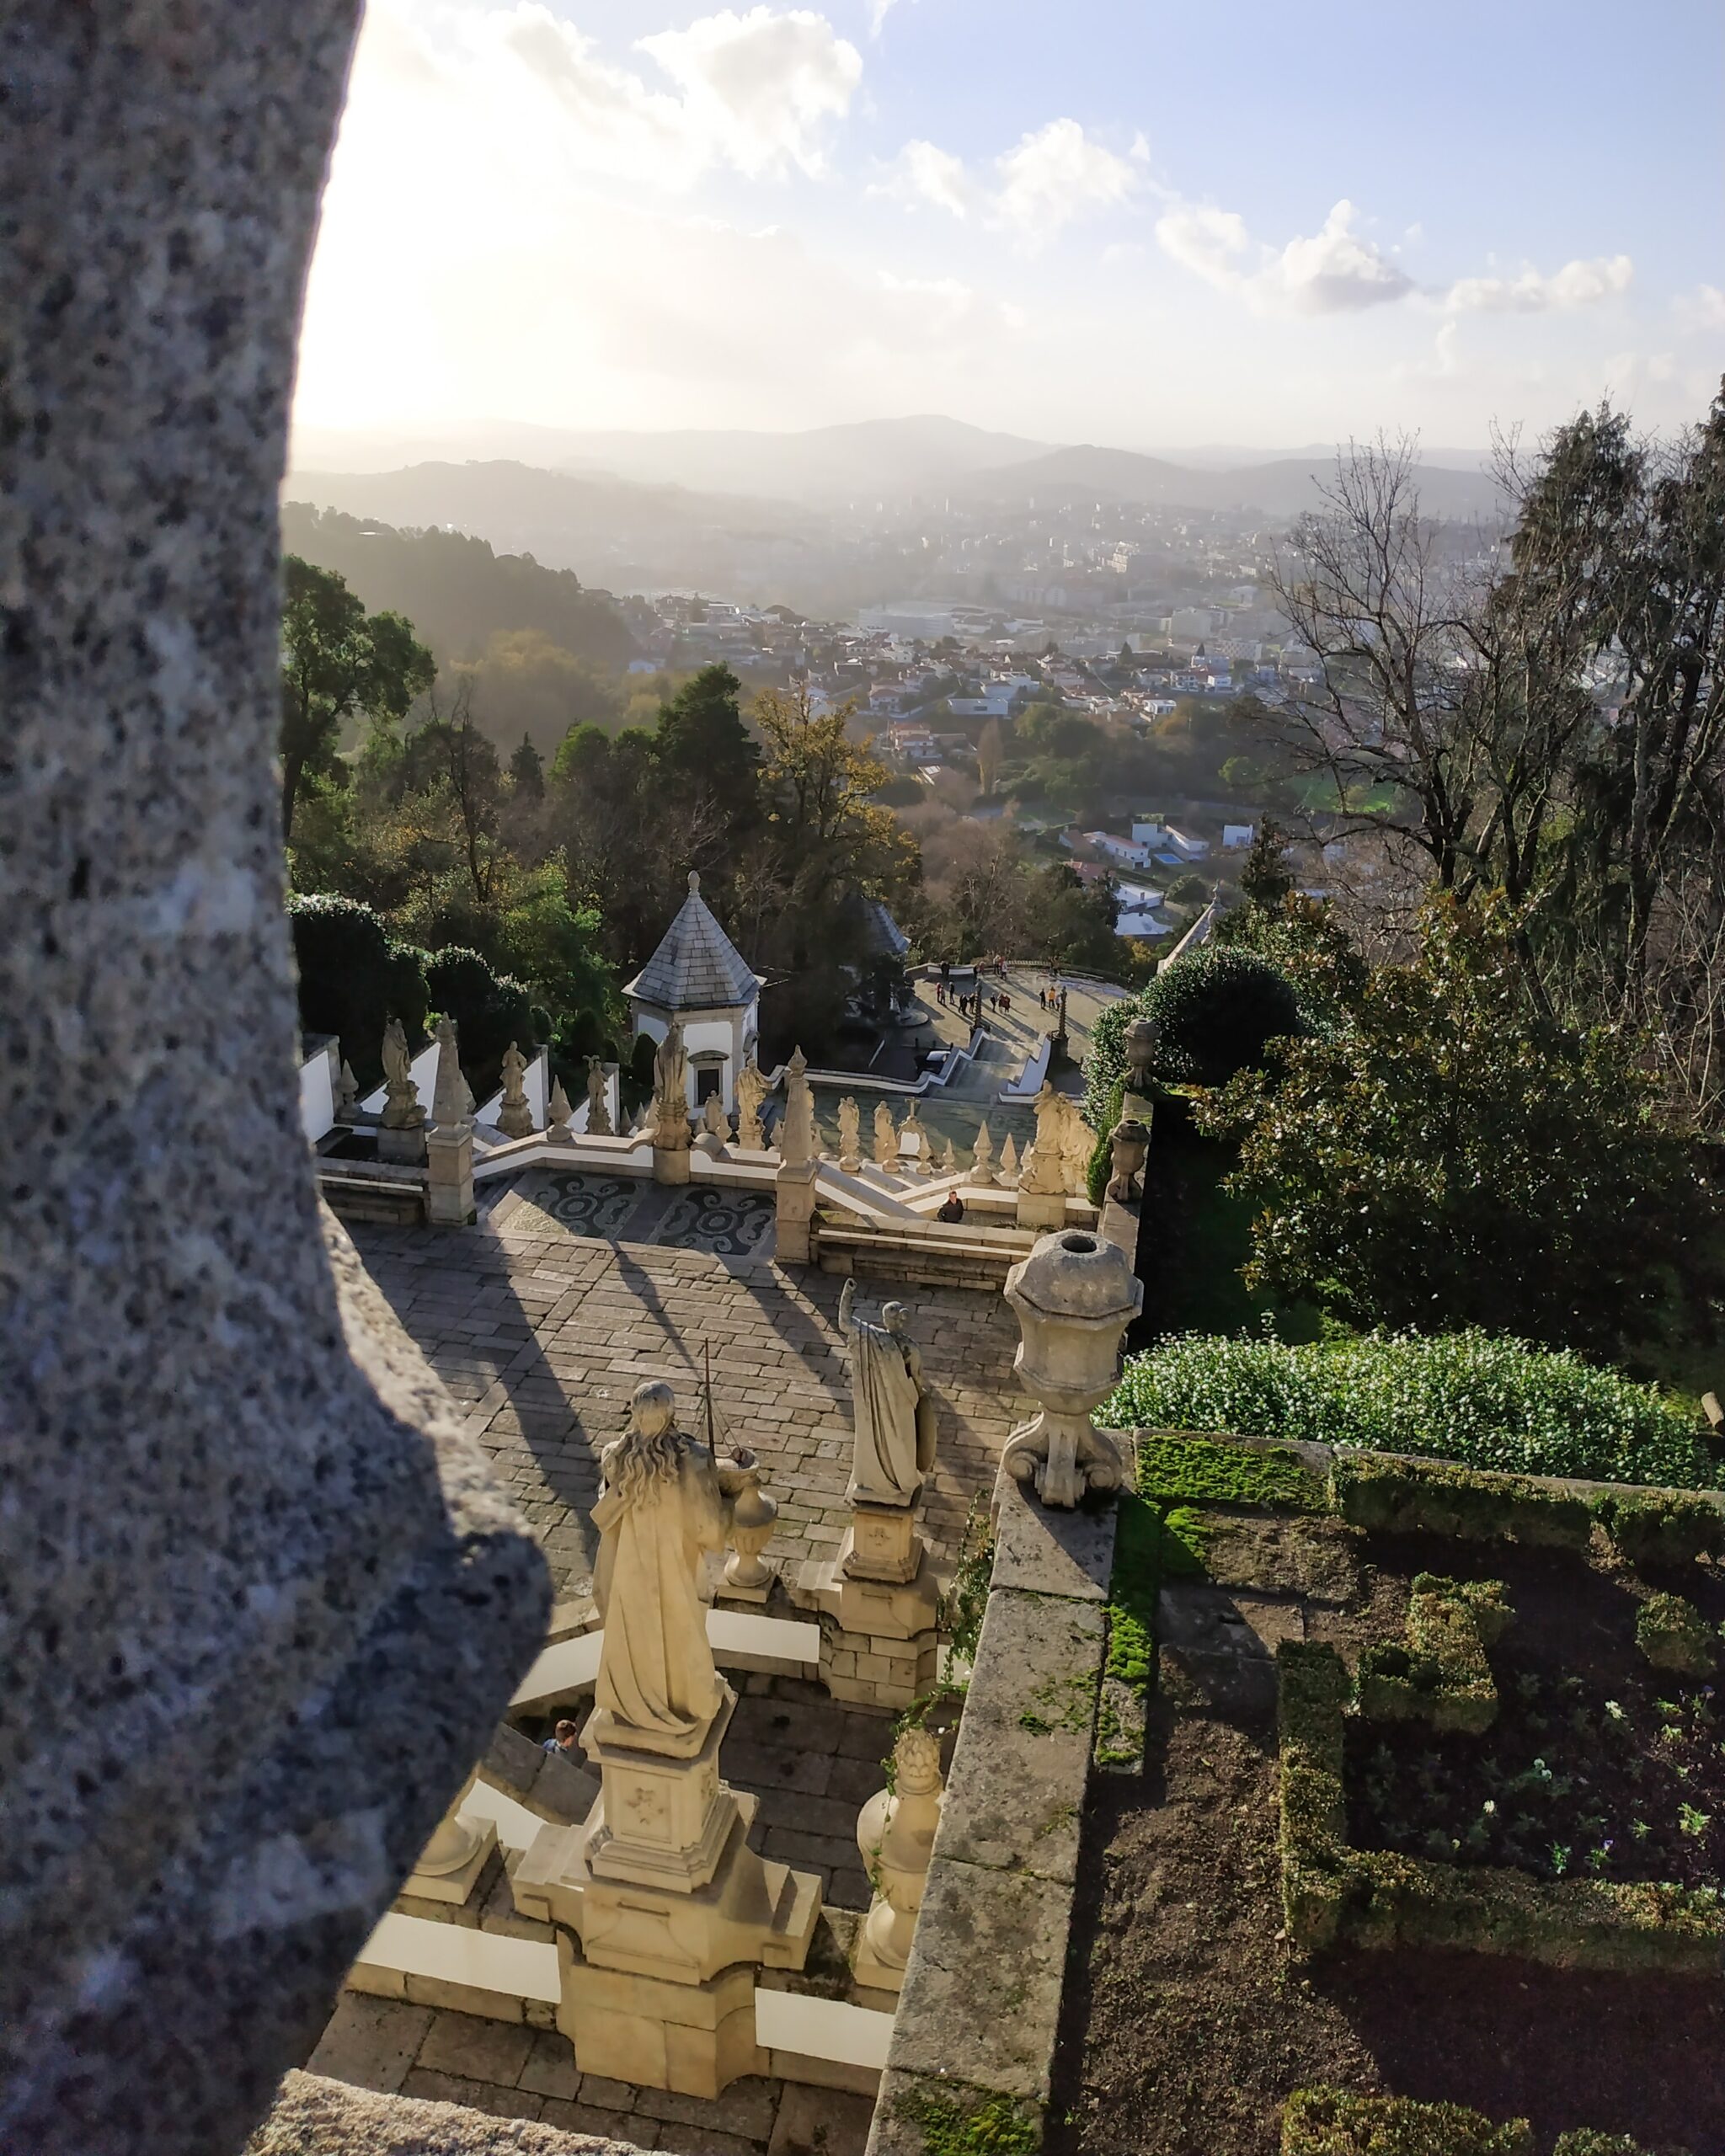 Braga Portugal Itinerary - 3 'Must See' Tourist Attractions - Bom Jesus do Monte